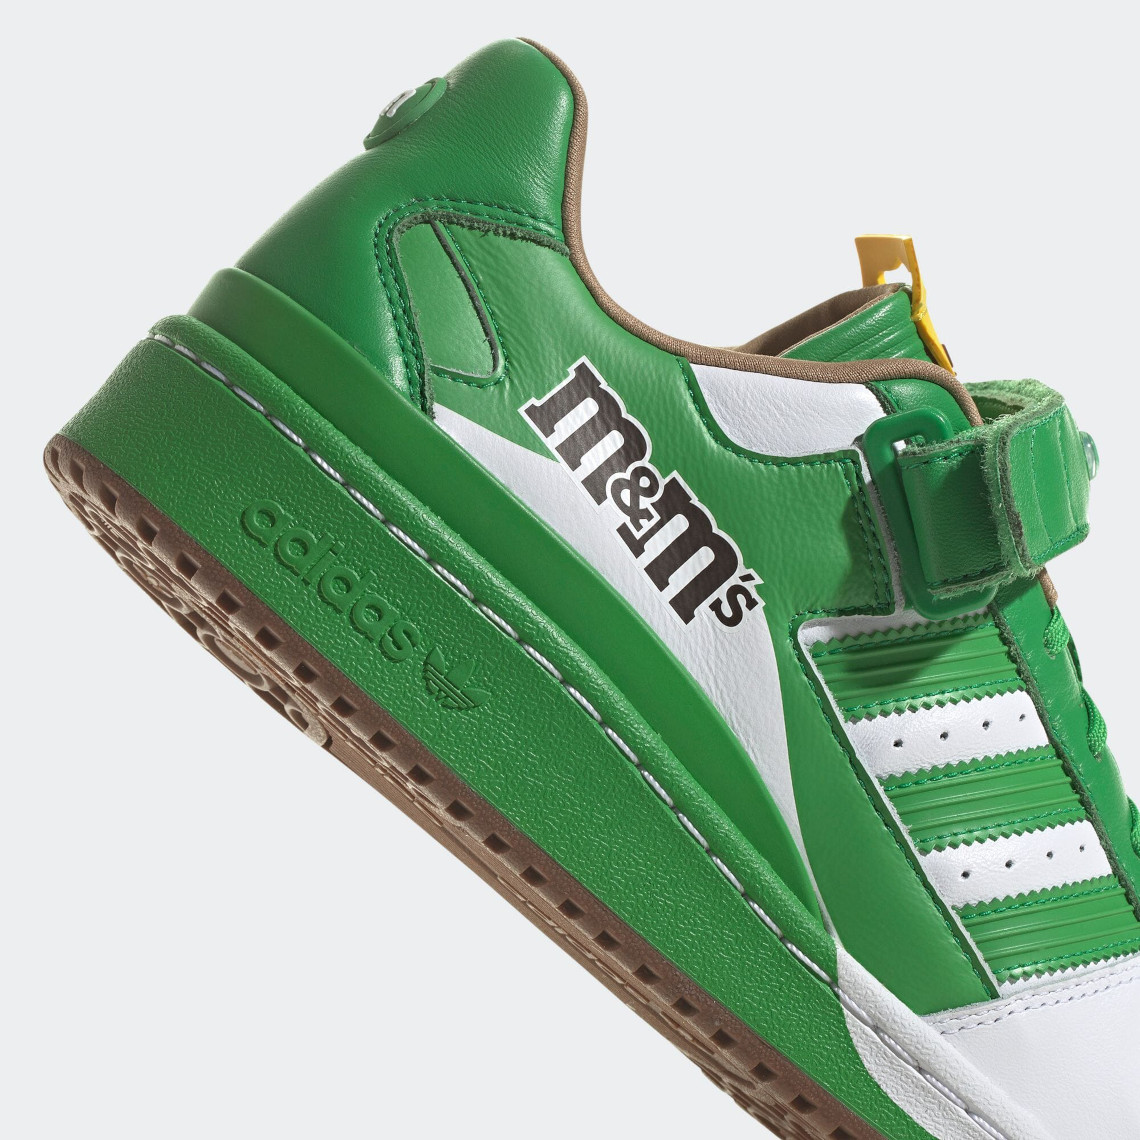 WpadcShops m&m's adidas climacool shoes for sale on primew Collaboration Release Date | vs. nike worldwide sales manager